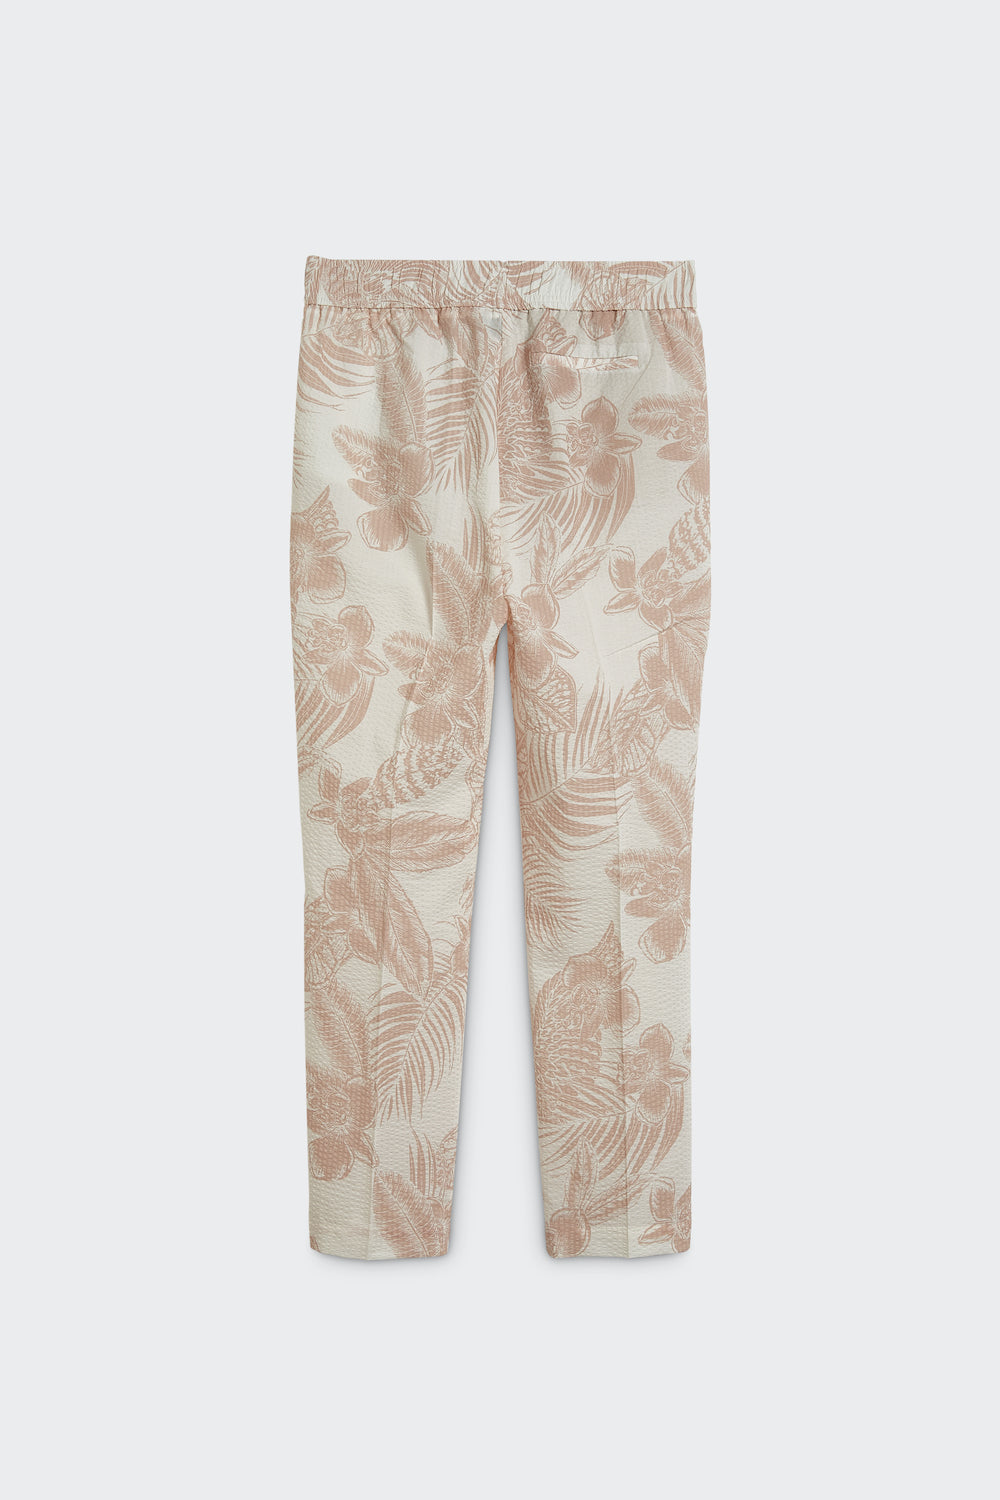 Printed Cotton Lille Slipover Pants with Welt Pockets